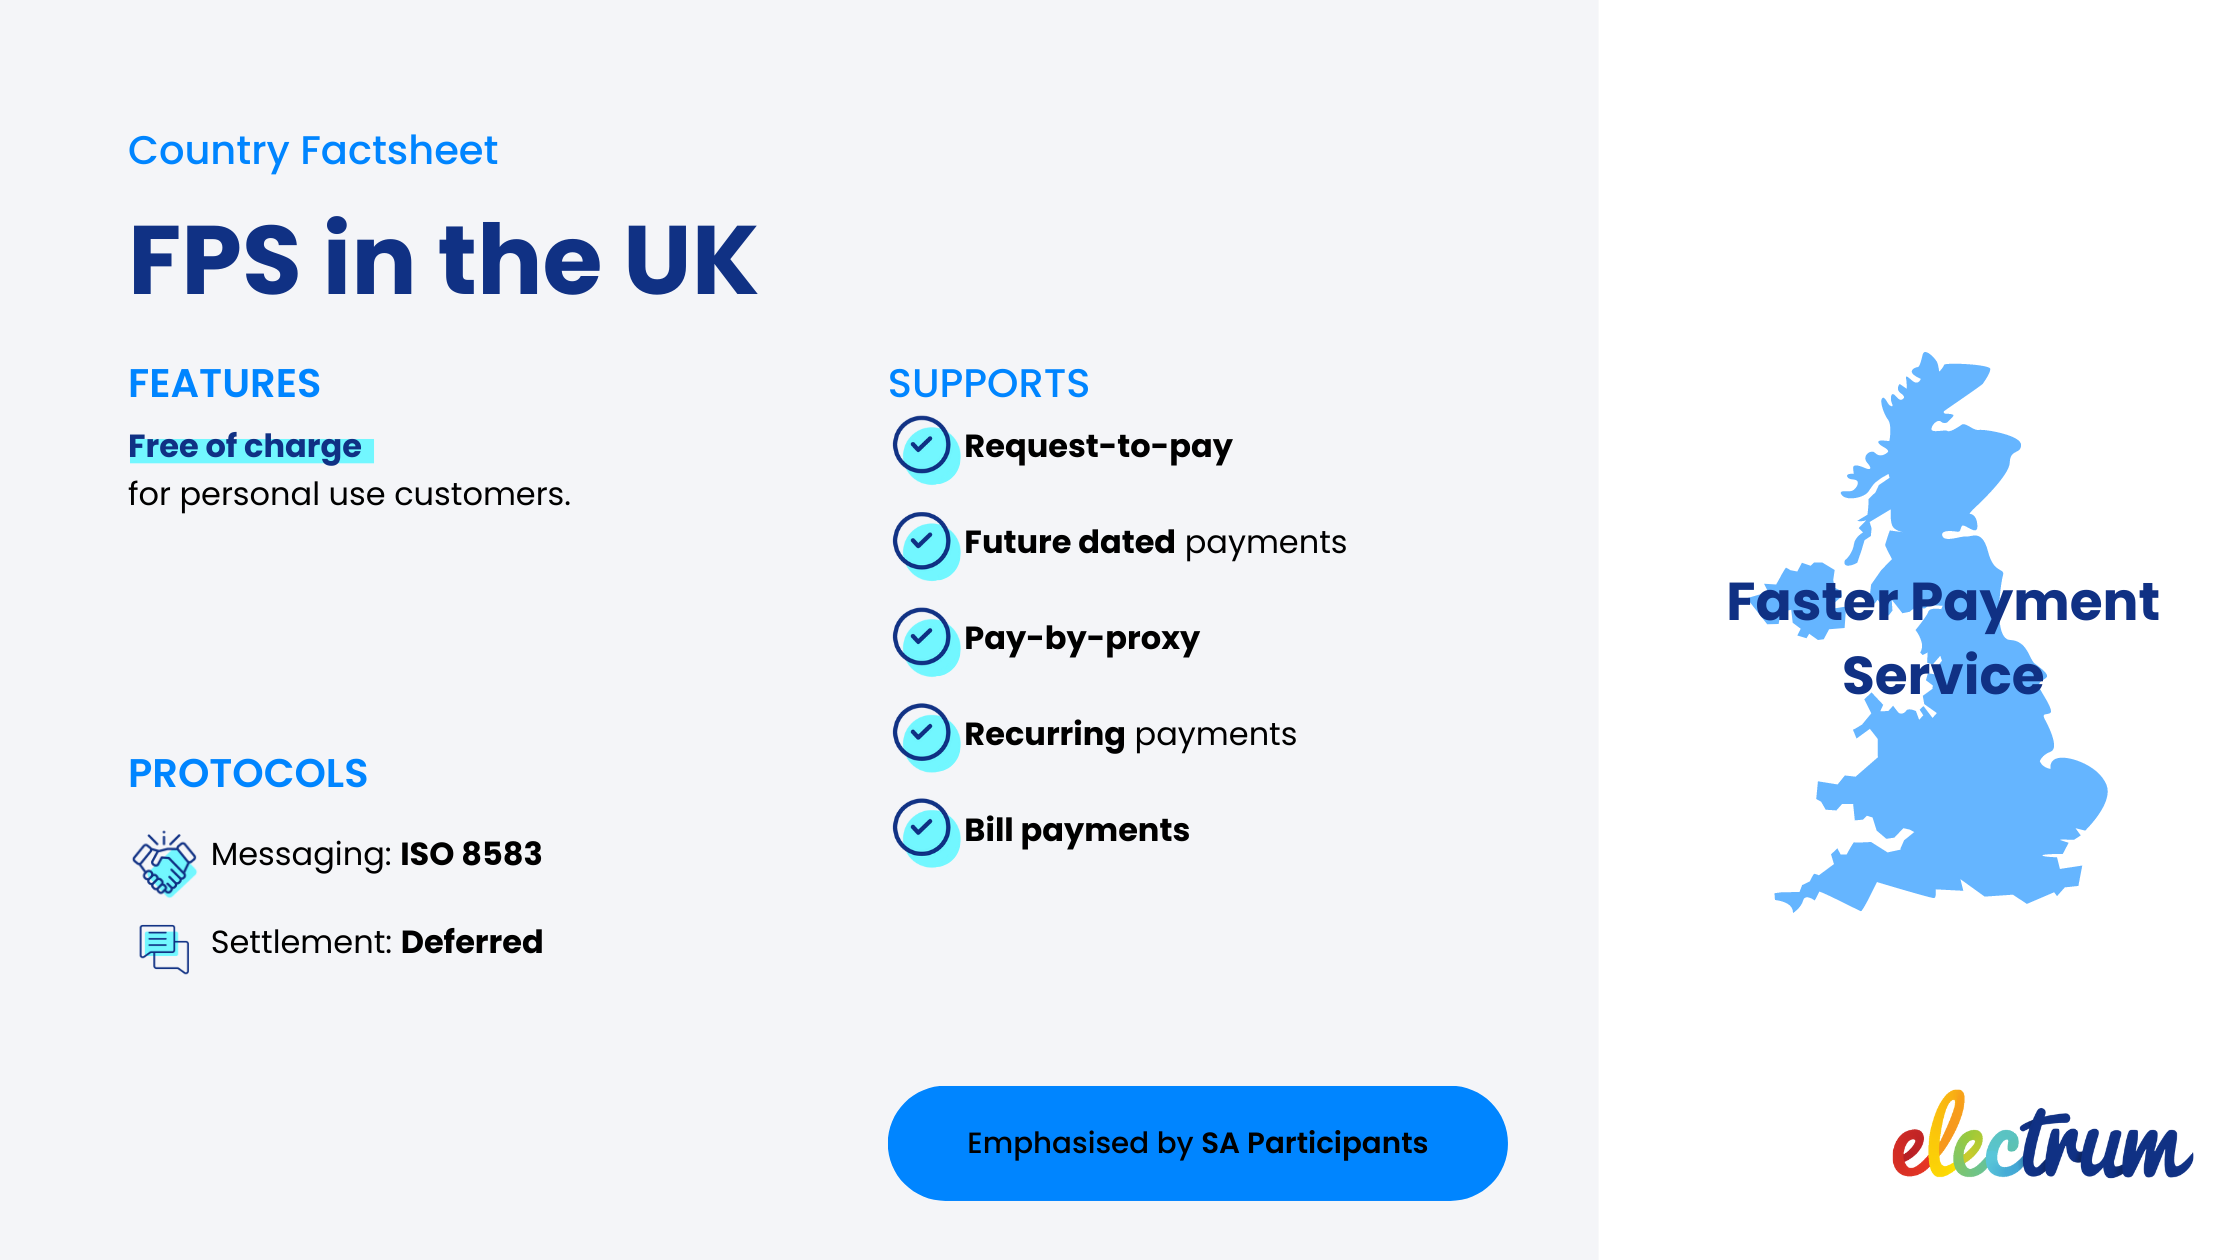 Factsheet summarising the Faster Payment Service in the United Kingdom